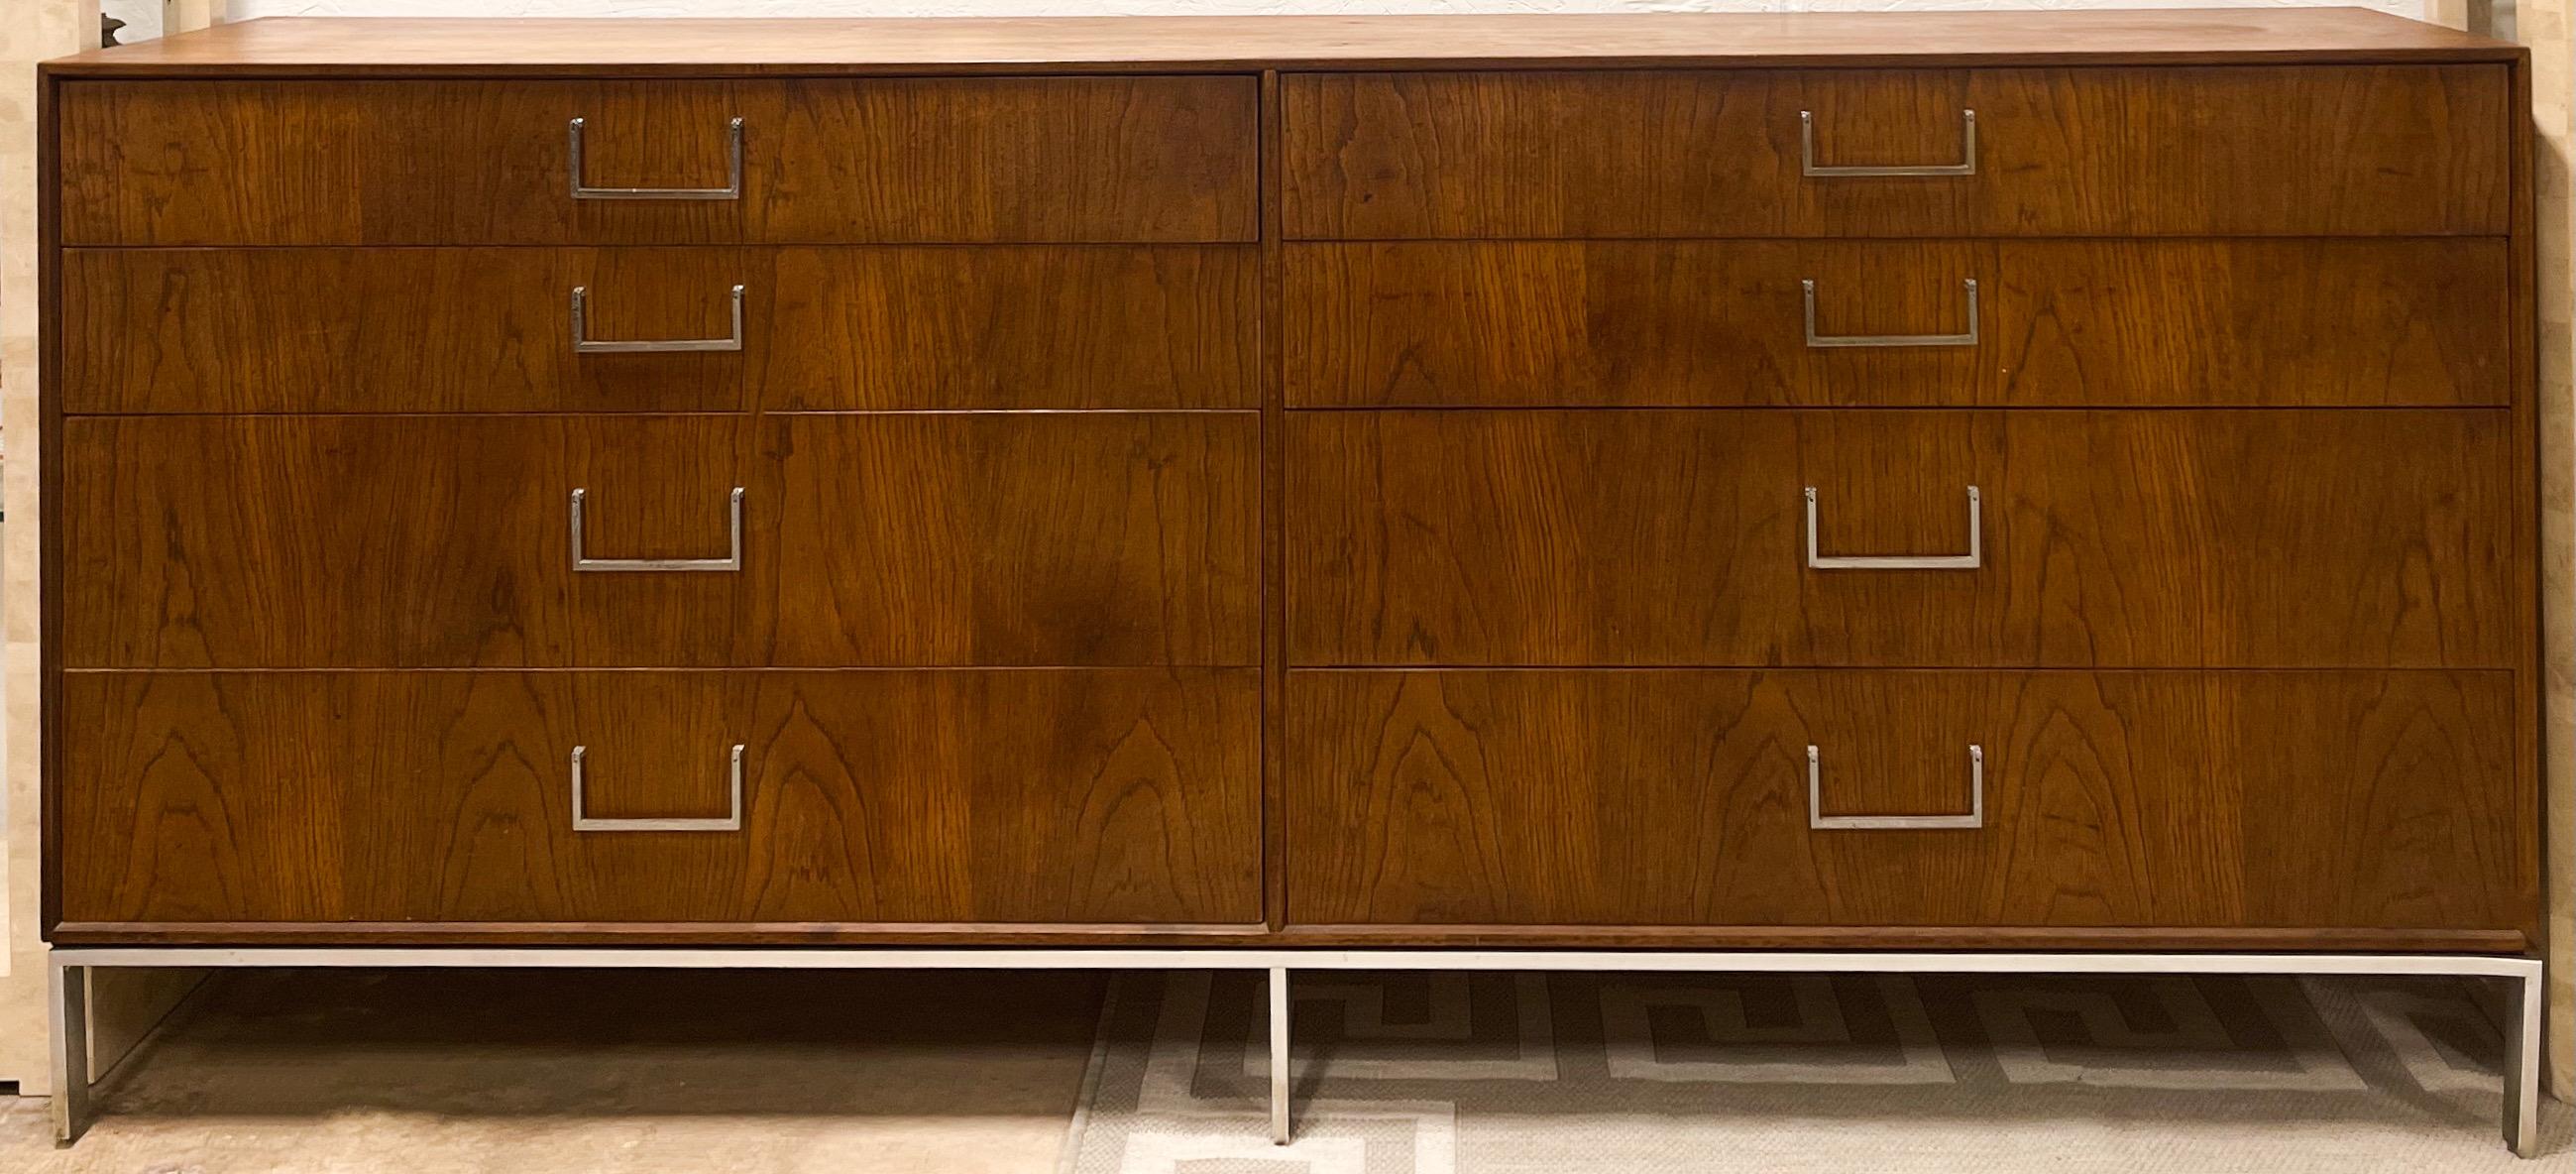 Chrome Mid-Century Modern Walnut Credenza / Chest of Drawers Att. to Florence Knoll For Sale